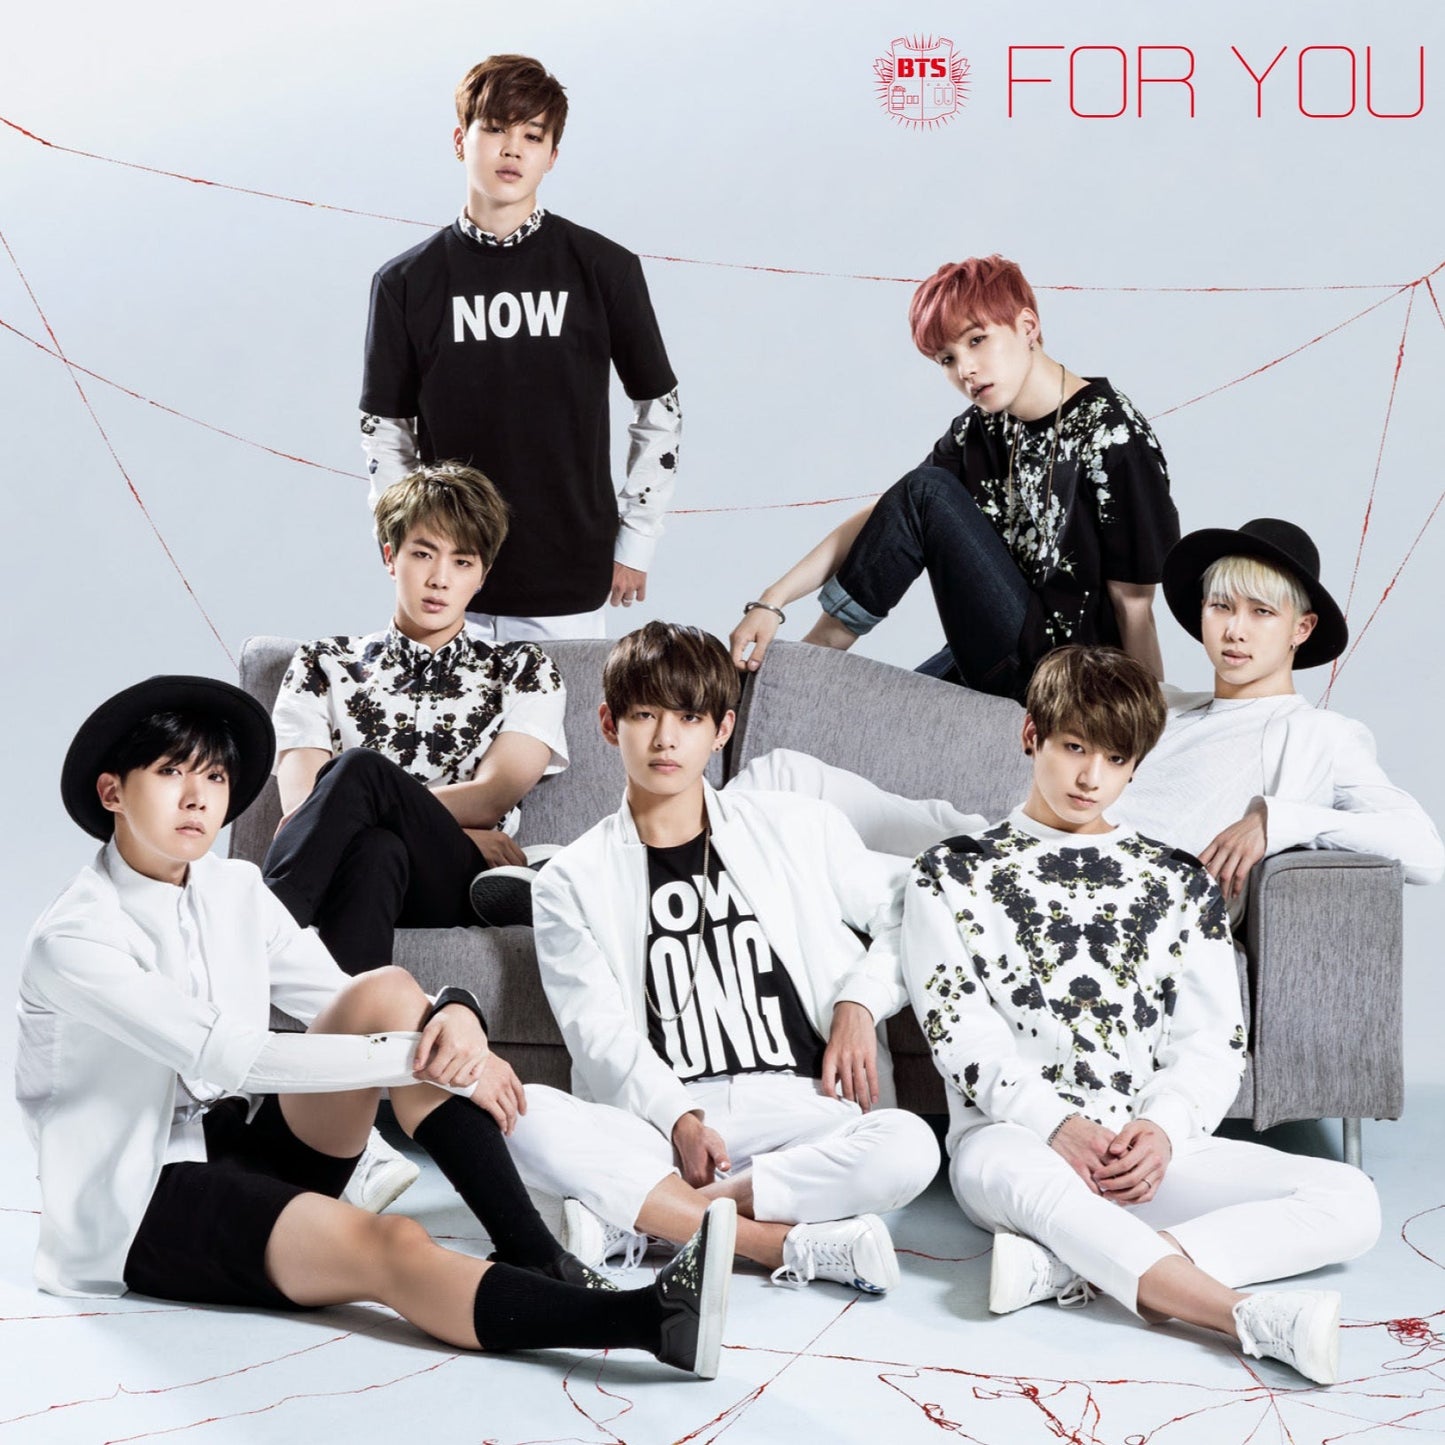 BTS - 'FOR YOU' (Limited Edition) VINYL LP